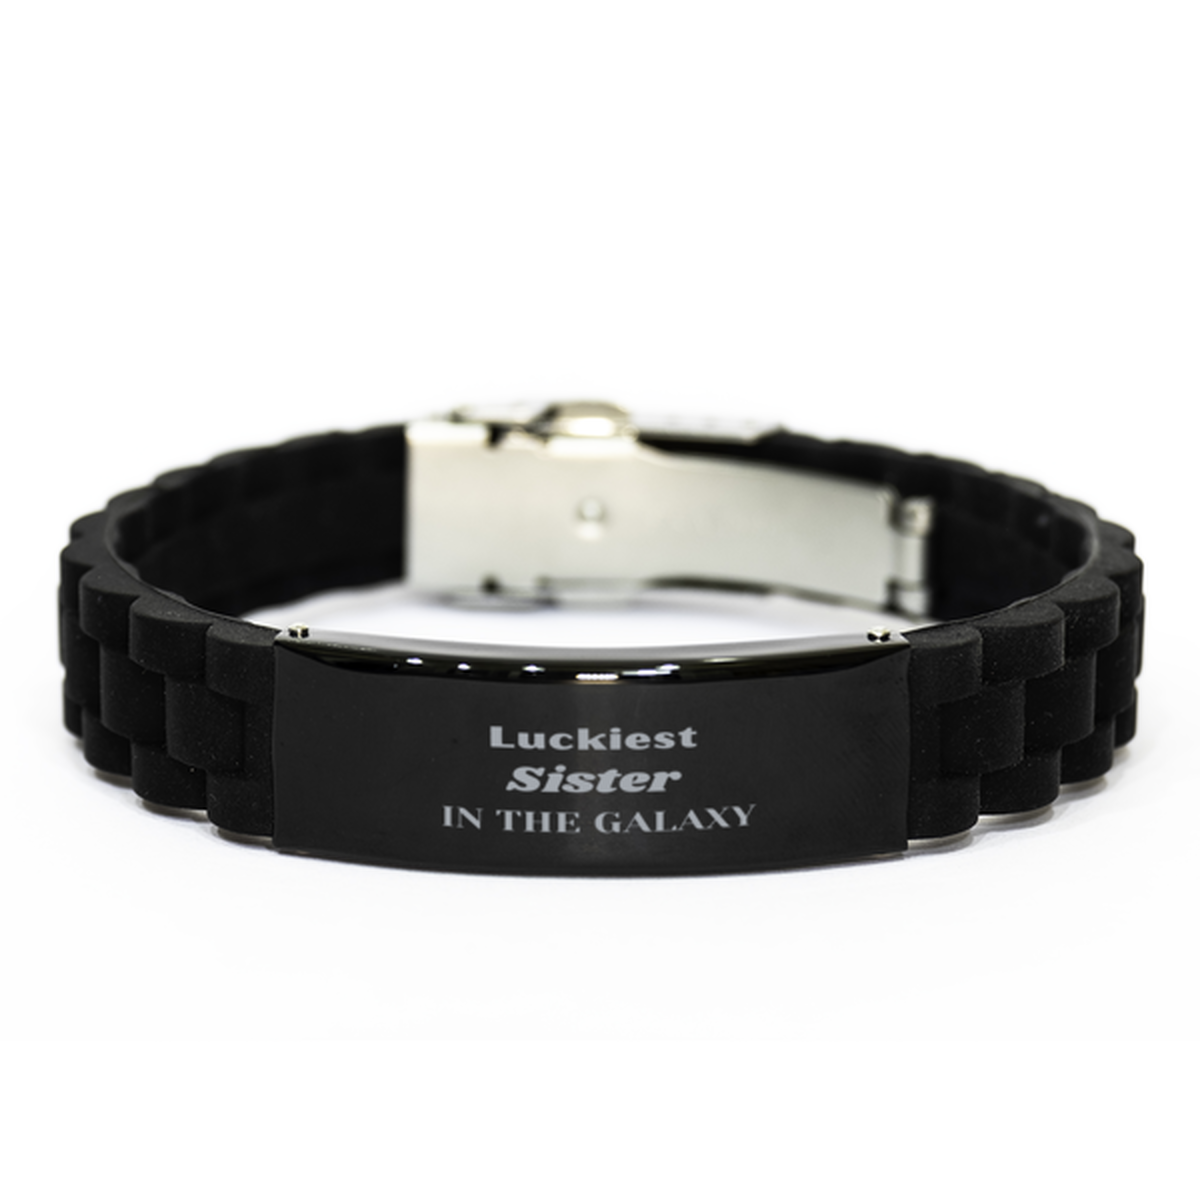 Luckiest Sister in the Galaxy, To My Sister Engraved Gifts, Christmas Sister Black Glidelock Clasp Bracelet Gifts, X-mas Birthday Unique Gifts For Sister Men Women